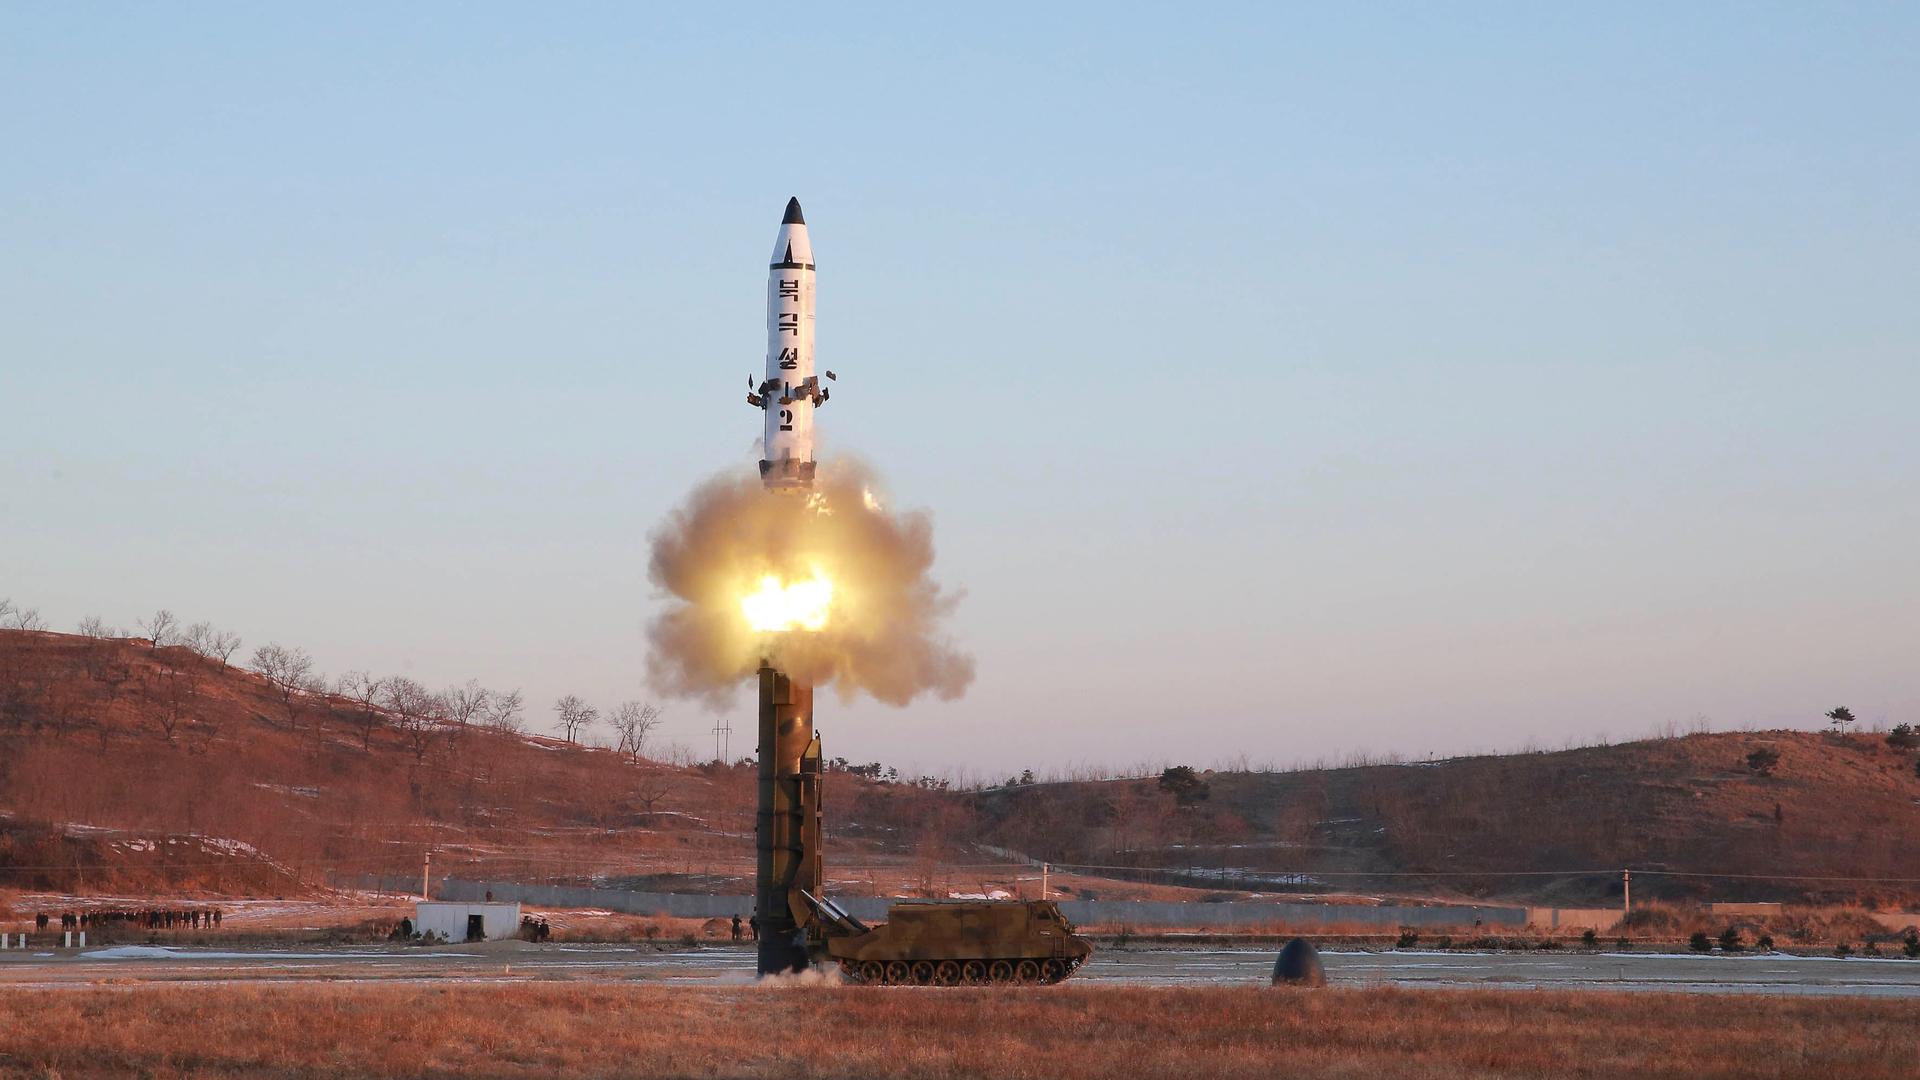 North Korea says it conducted a test launch of a Pukguksong-2 guided missile on Feb. 12 and that the test was a “complete success.” This undated photo was released by North Korea's Korean Central News Agency (KCNA) in Pyongyang on Feb. 13, 2017.